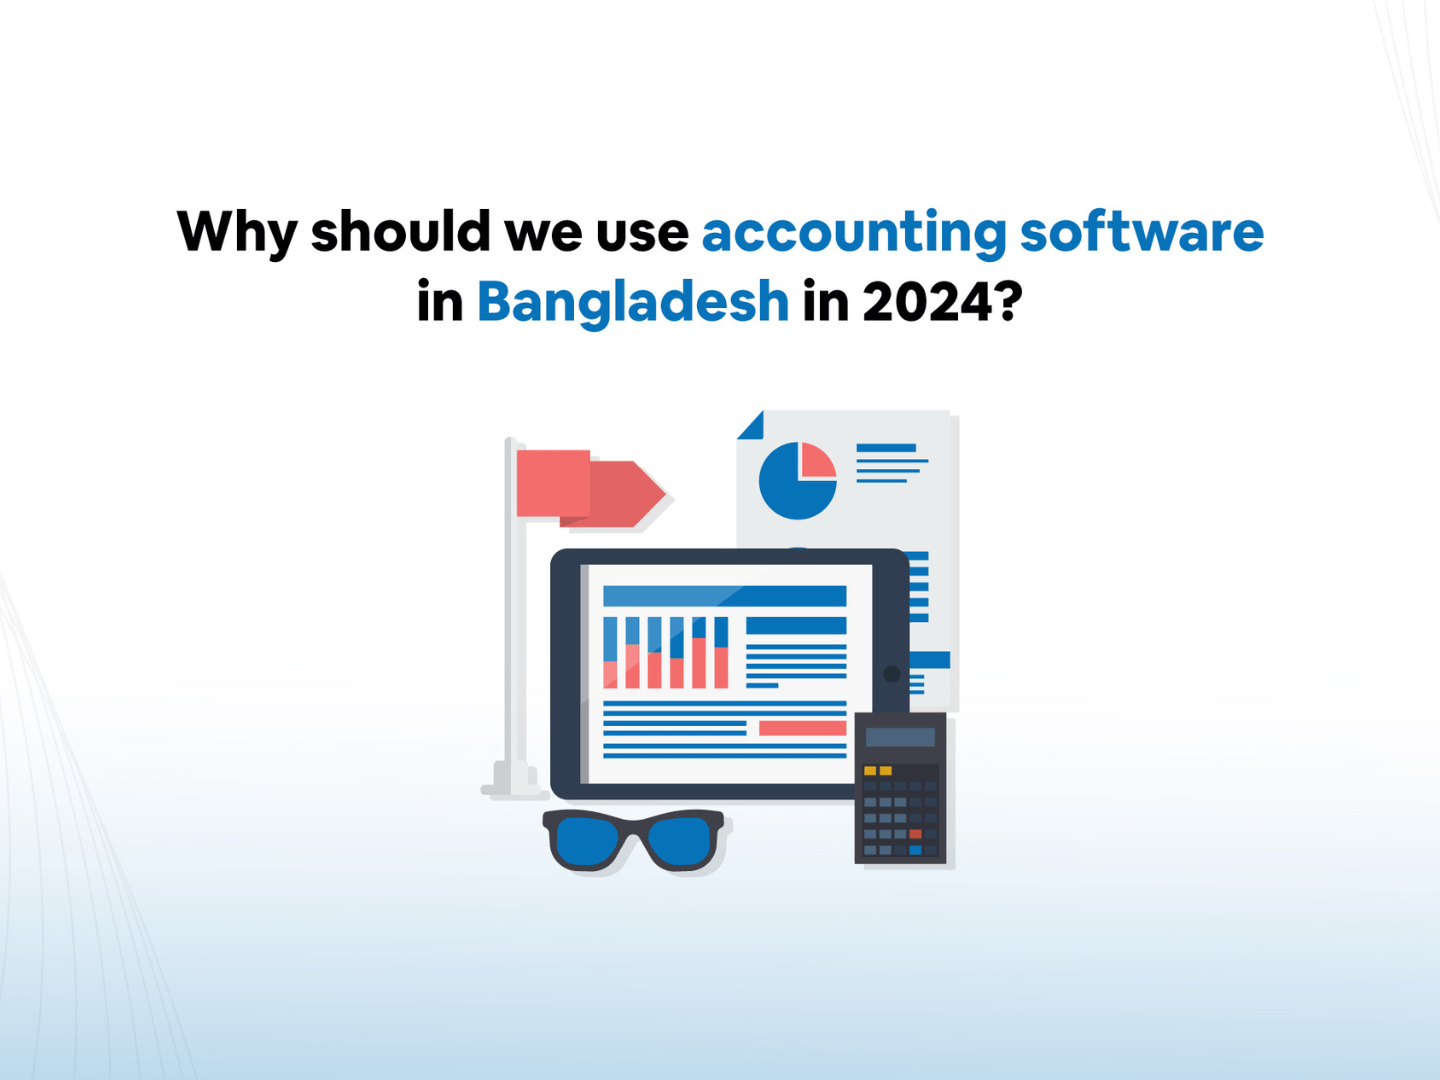 why should use accounting software in bangladesh in 2024.